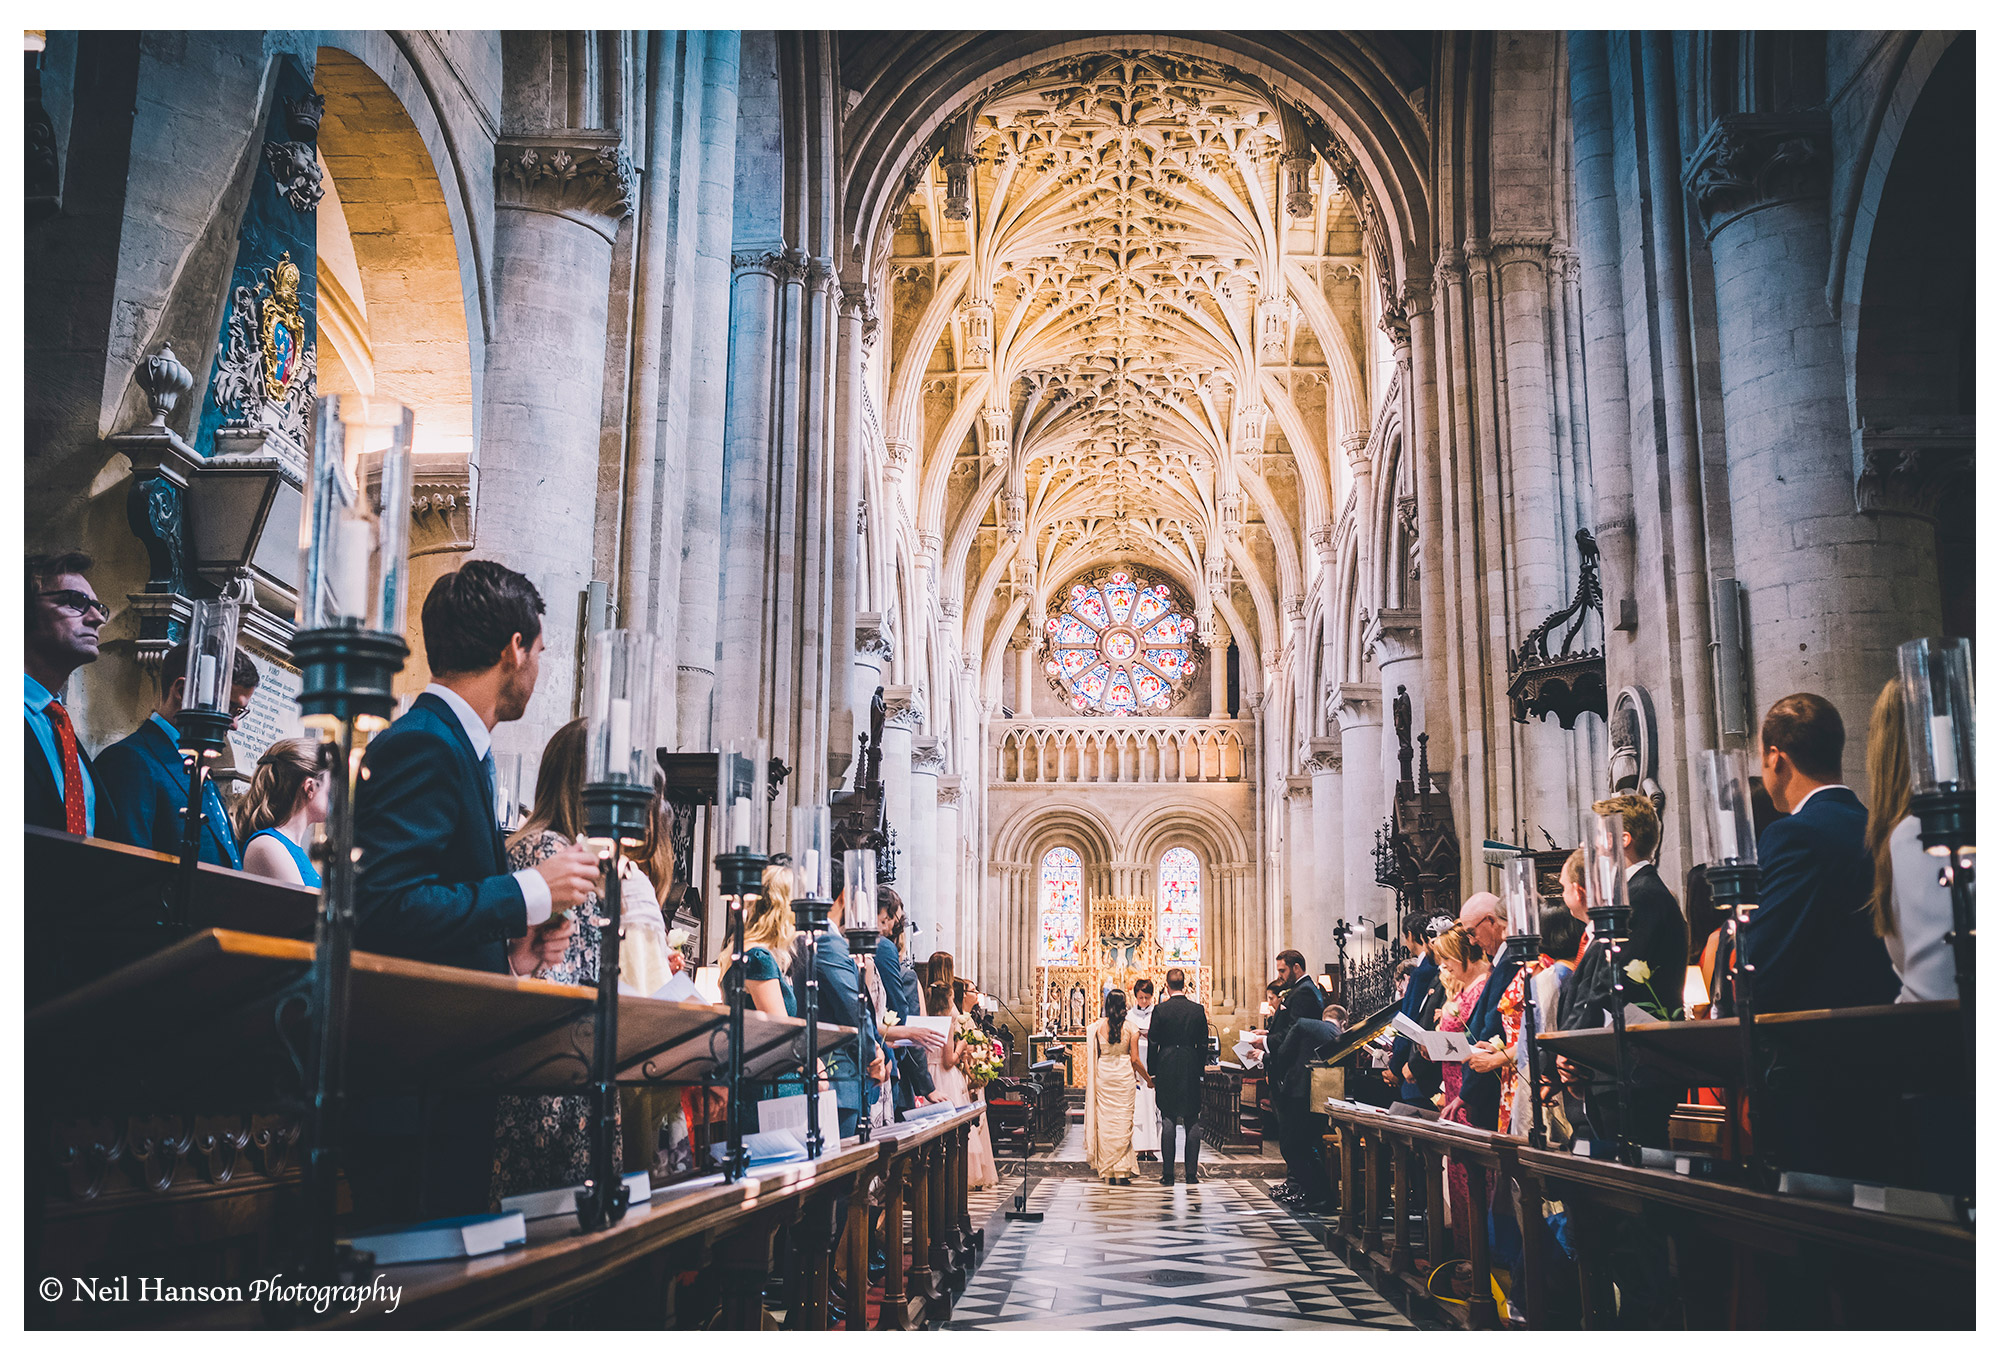 Beautiful wedding ceremony in the magnificent Christ Church Cathedral in Oxford